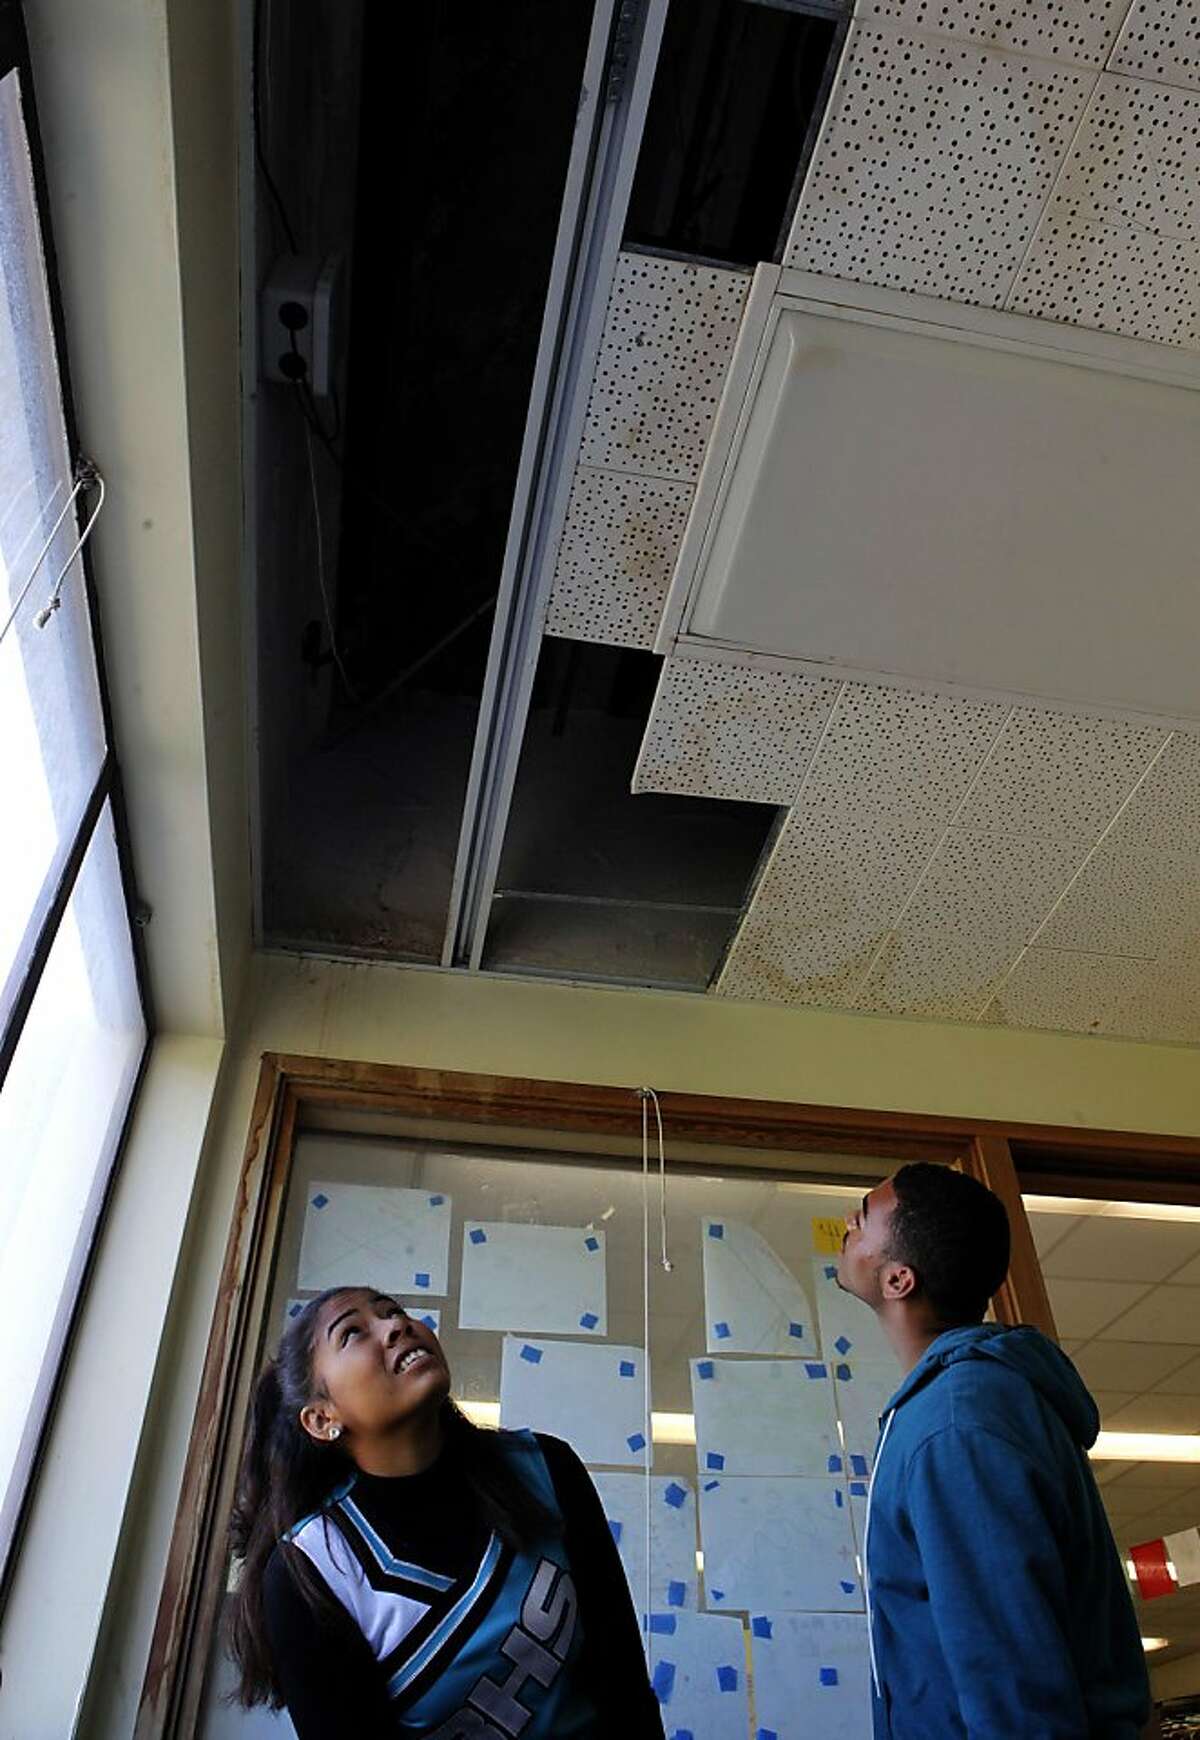 Ashley Milton and Eric Johnson look at the water damaged ceiling of an office inside their classroom, on Friday October 7, 2011, one of the many areas of needed repair at Phillip and Sala Burton Academic High School in San Francisco, Ca. Money would become available if Proposition A were passed in the upcoming elections, funding that would fix the school.